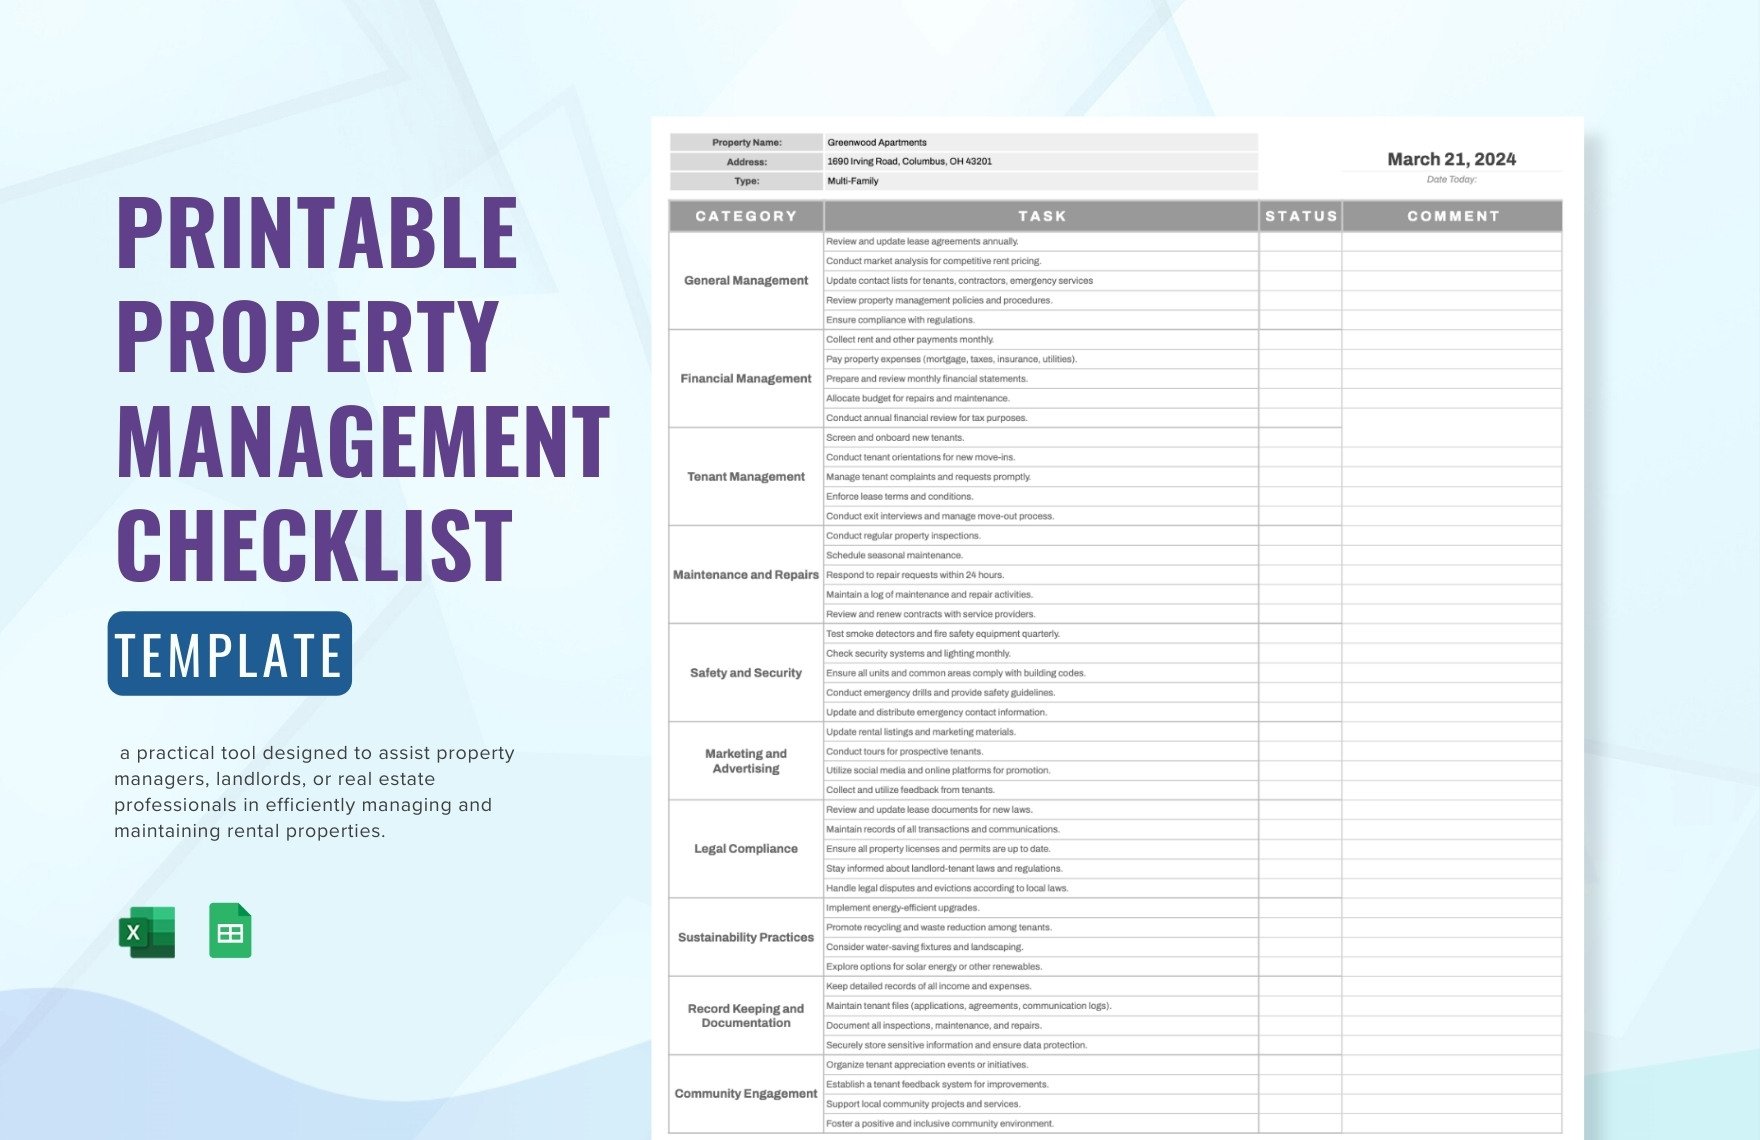 Printable Property Management Checklist Template in Excel, Google Sheets